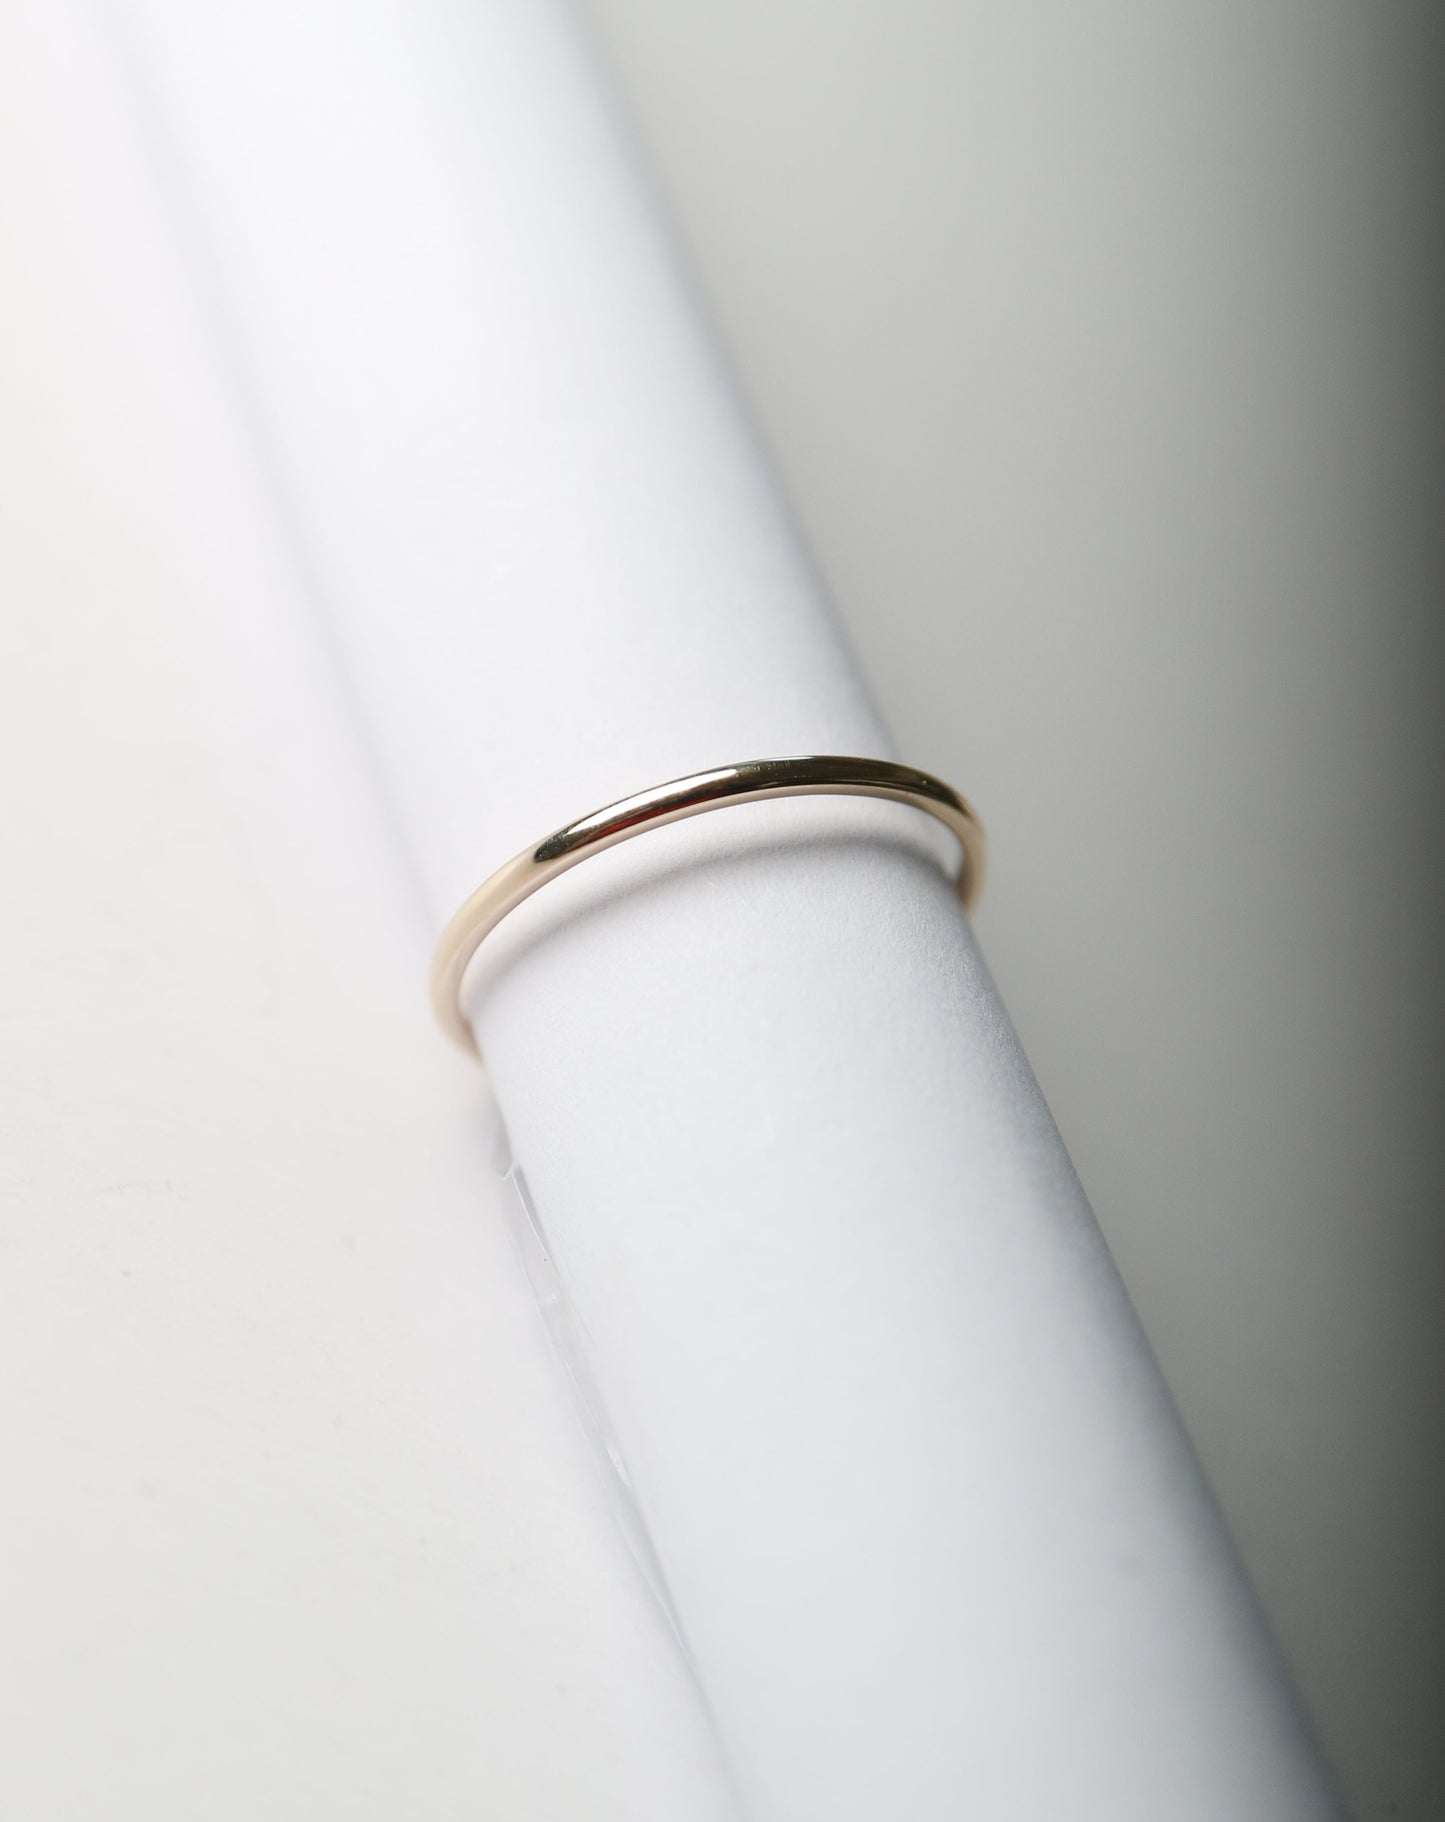 Classic 9ct gold stacking ring band